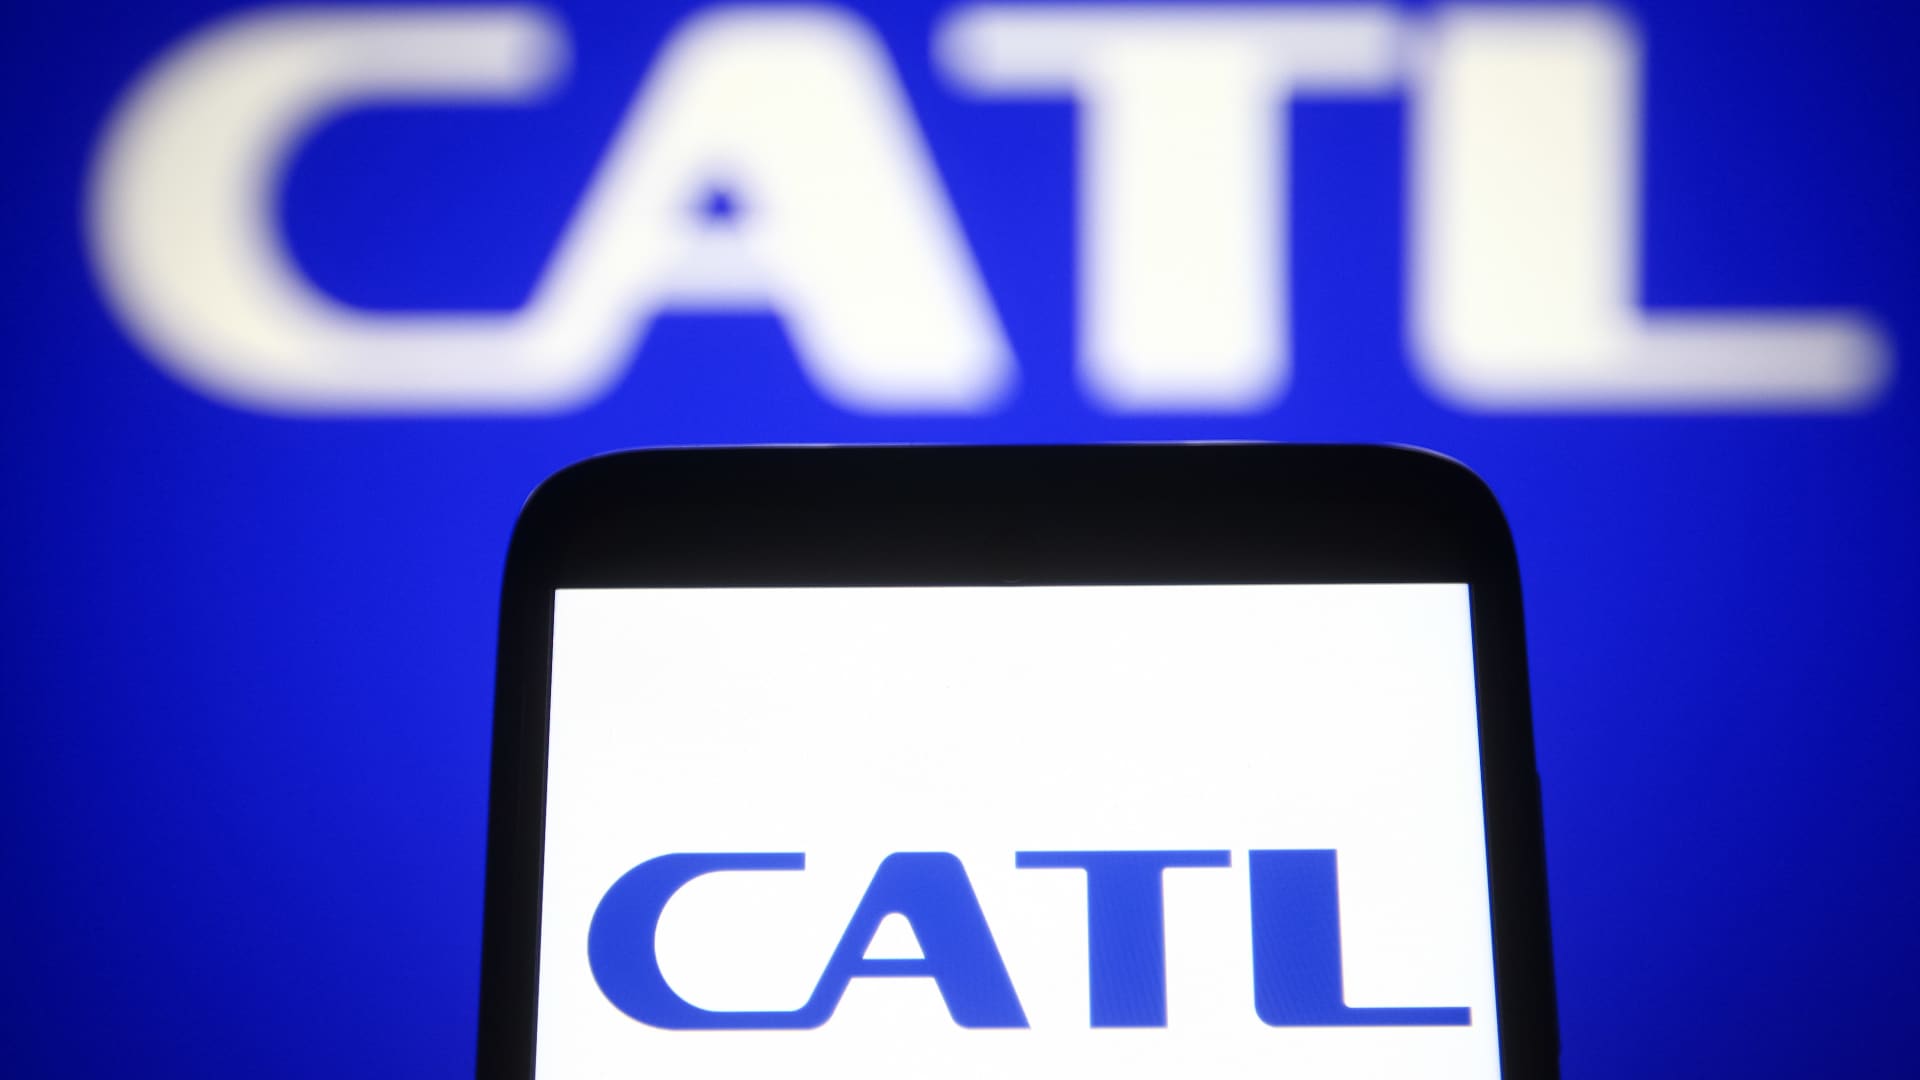 Tesla supplier CATL evaluating battery swapping business overseas